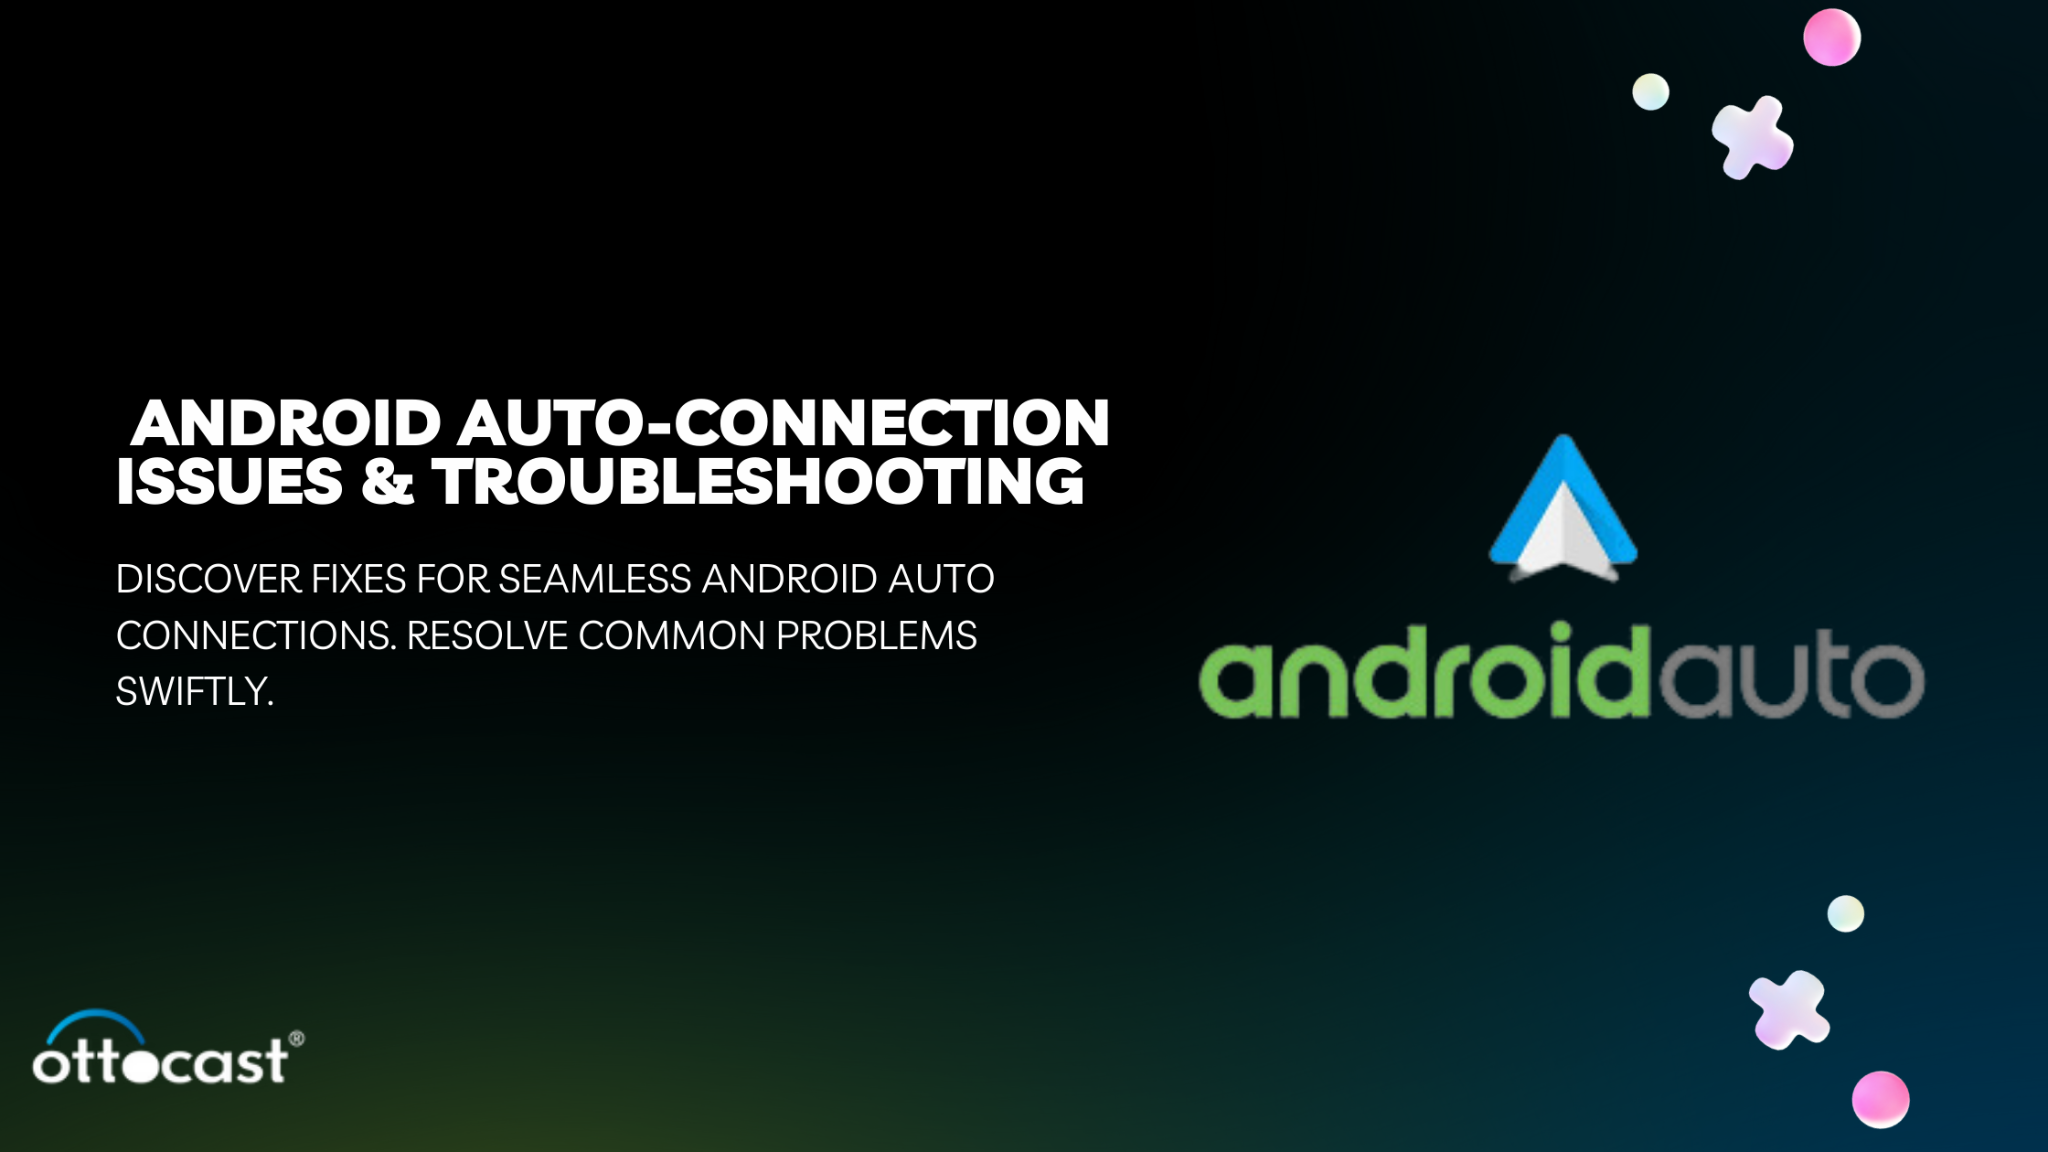 Dreaming of wireless Android Auto? Now is the time to get this popular car  adapter